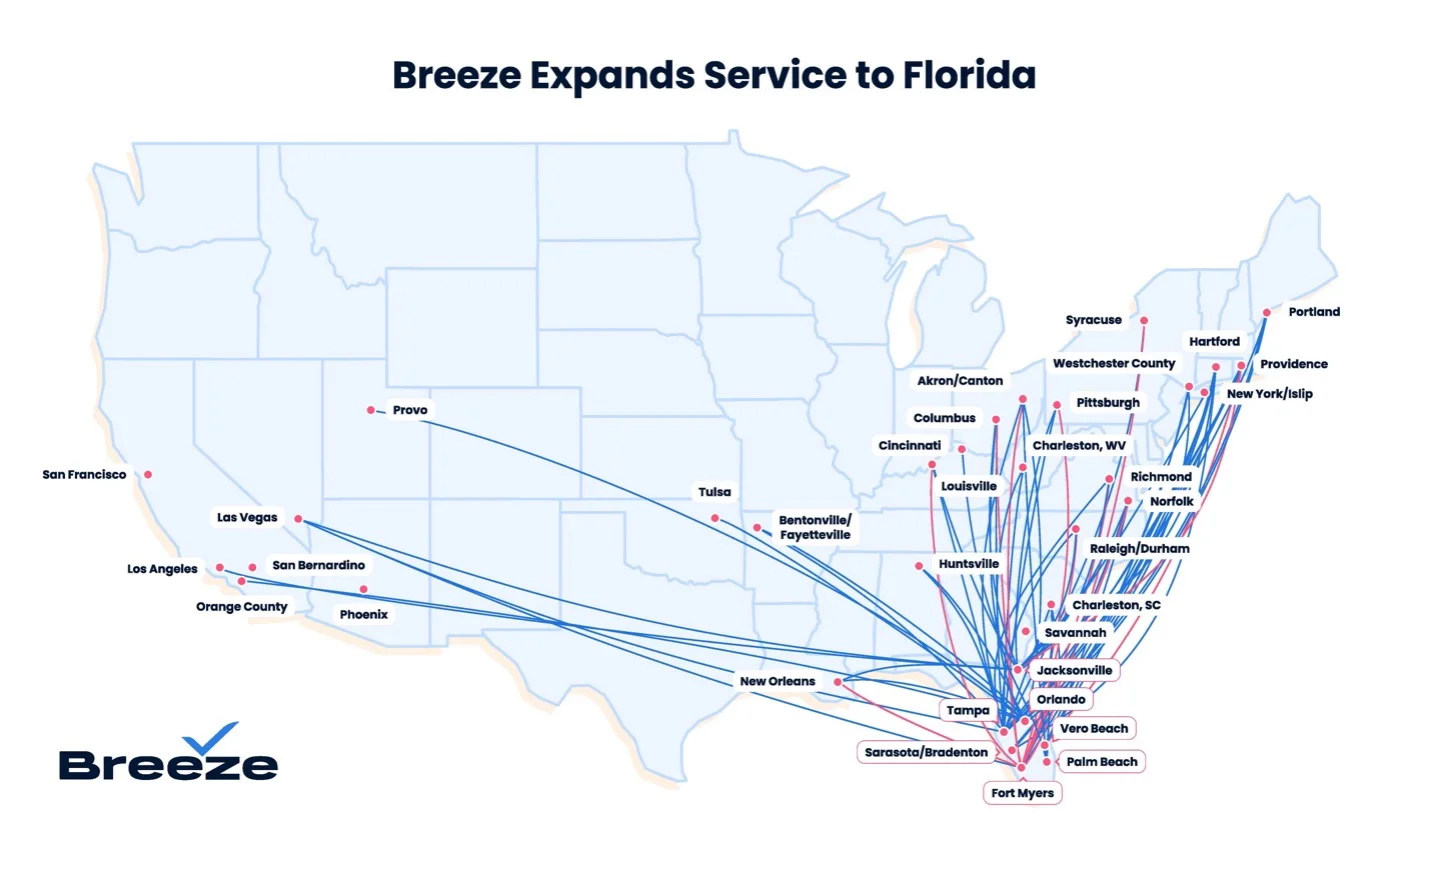 Breeze expands business services to Florida including a US map and flight routes